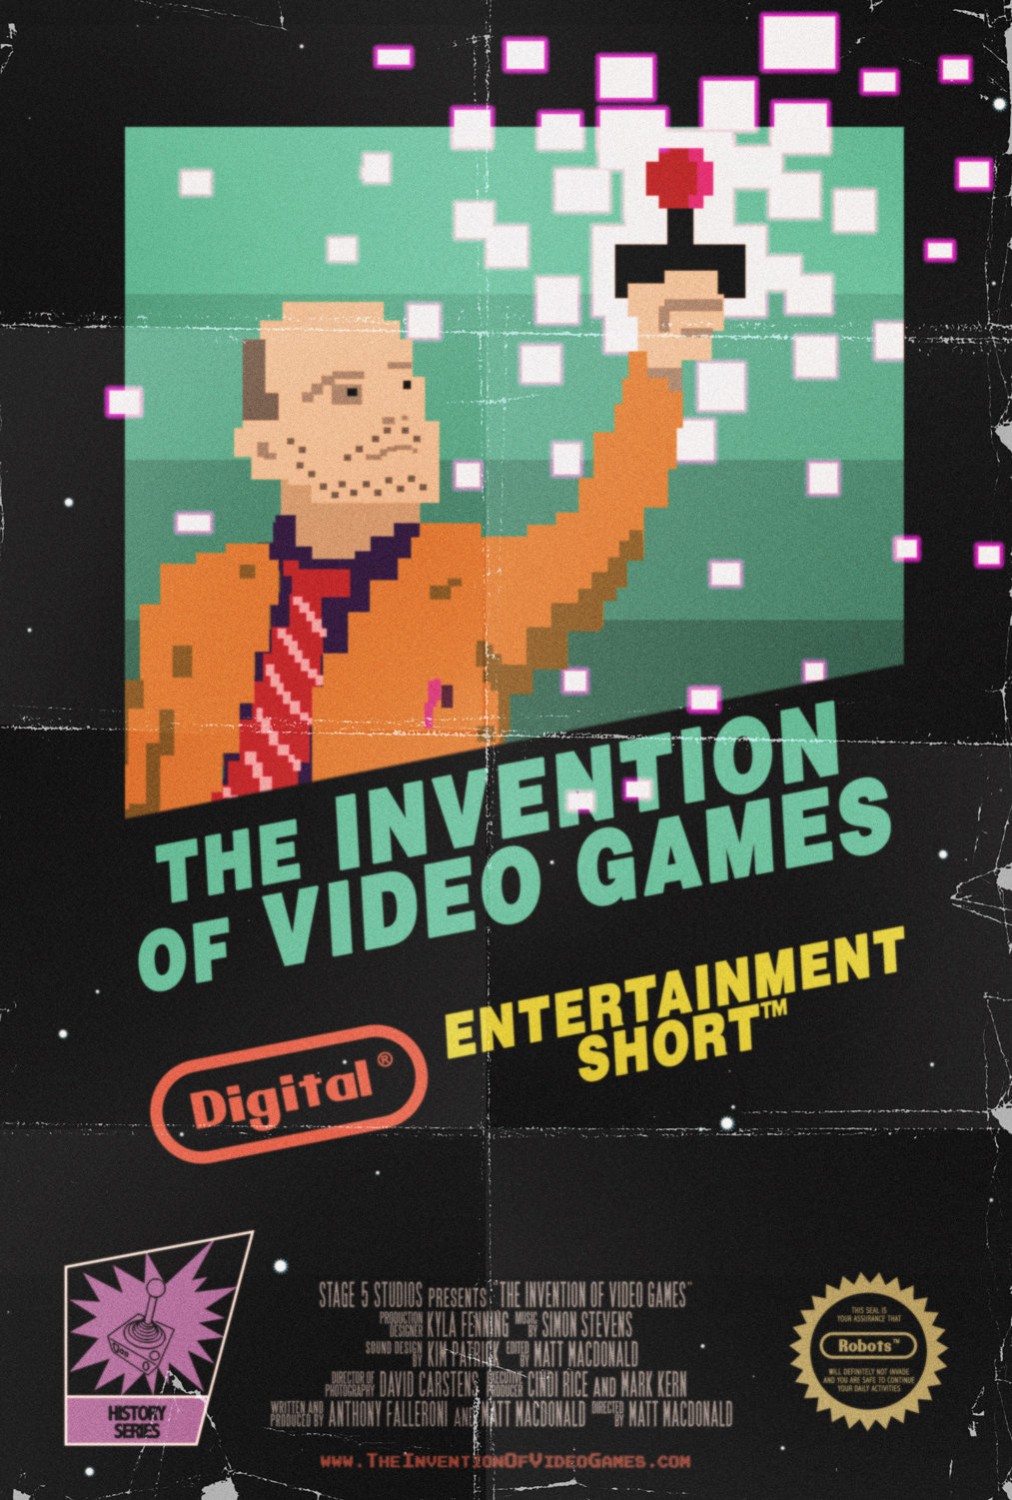 Extra Large Movie Poster Image for The Invention of Video Games